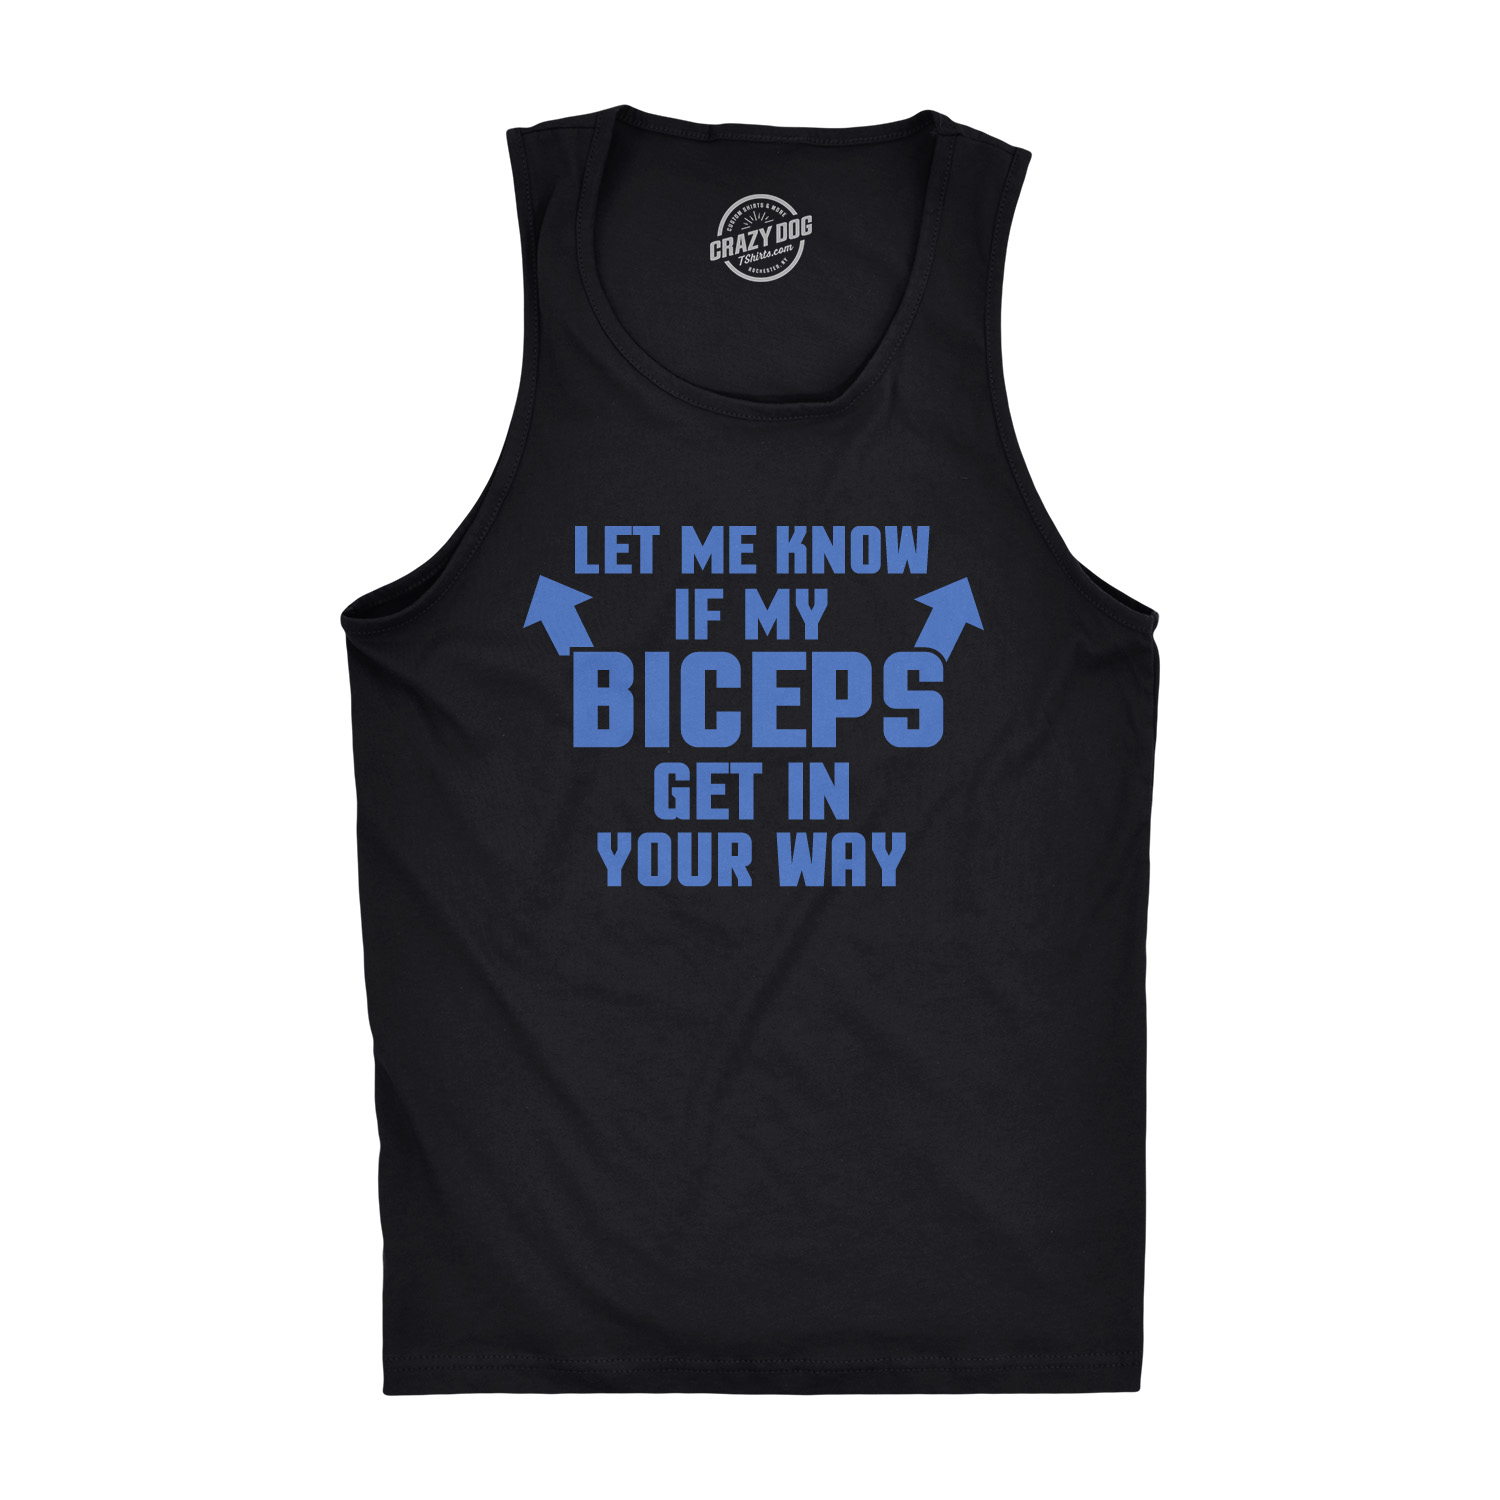 Let Me Know If My Biceps Get In The Way Tank Top Funny Workout Sleeveless Tee - image 1 of 8